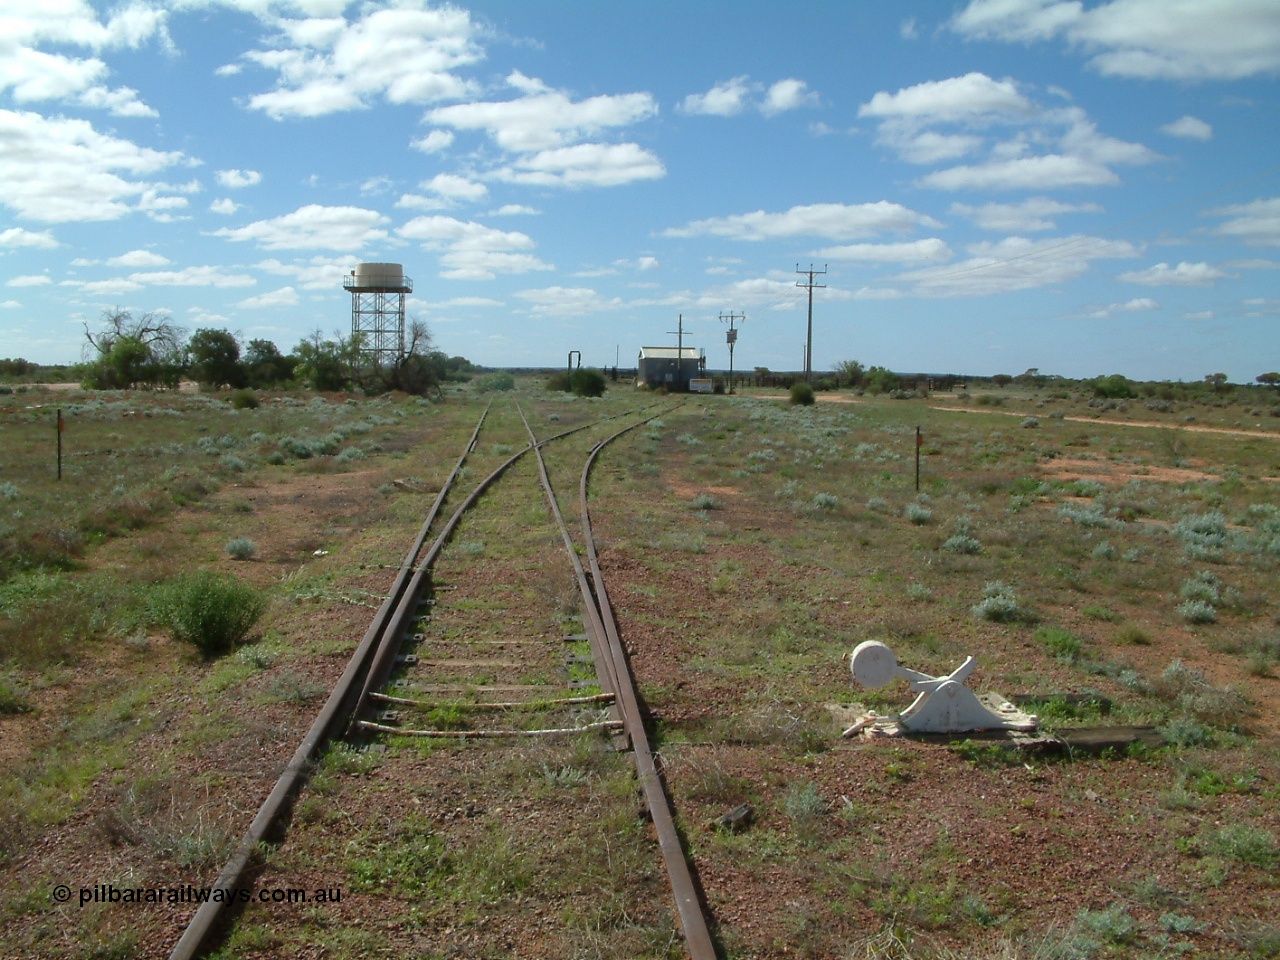 030415 140845
Kingoonya, located at the 426.5 km on the Trans Australian Railway, looking north at the sidings, power station with cattle yards on the right. [url=https://goo.gl/maps/iLo7mK7itLUcZUsp8]GeoData location[/url].
